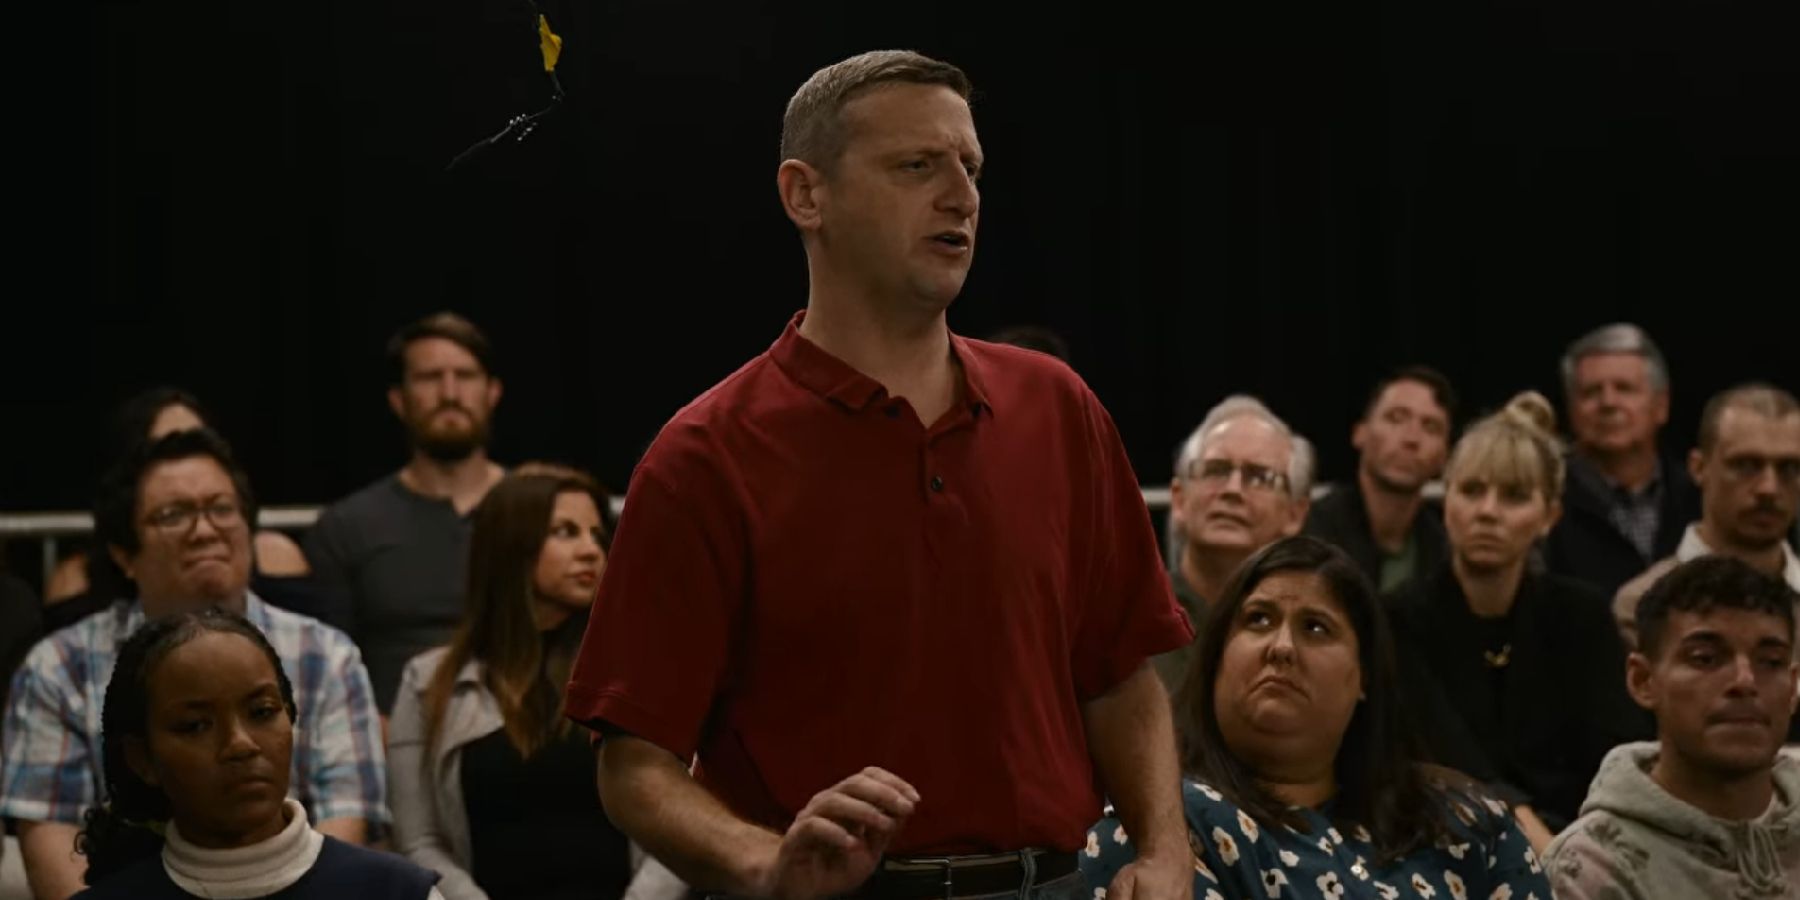 Tim Robinson in the live sitcom taping sketch from I Think You Should Leave season 3